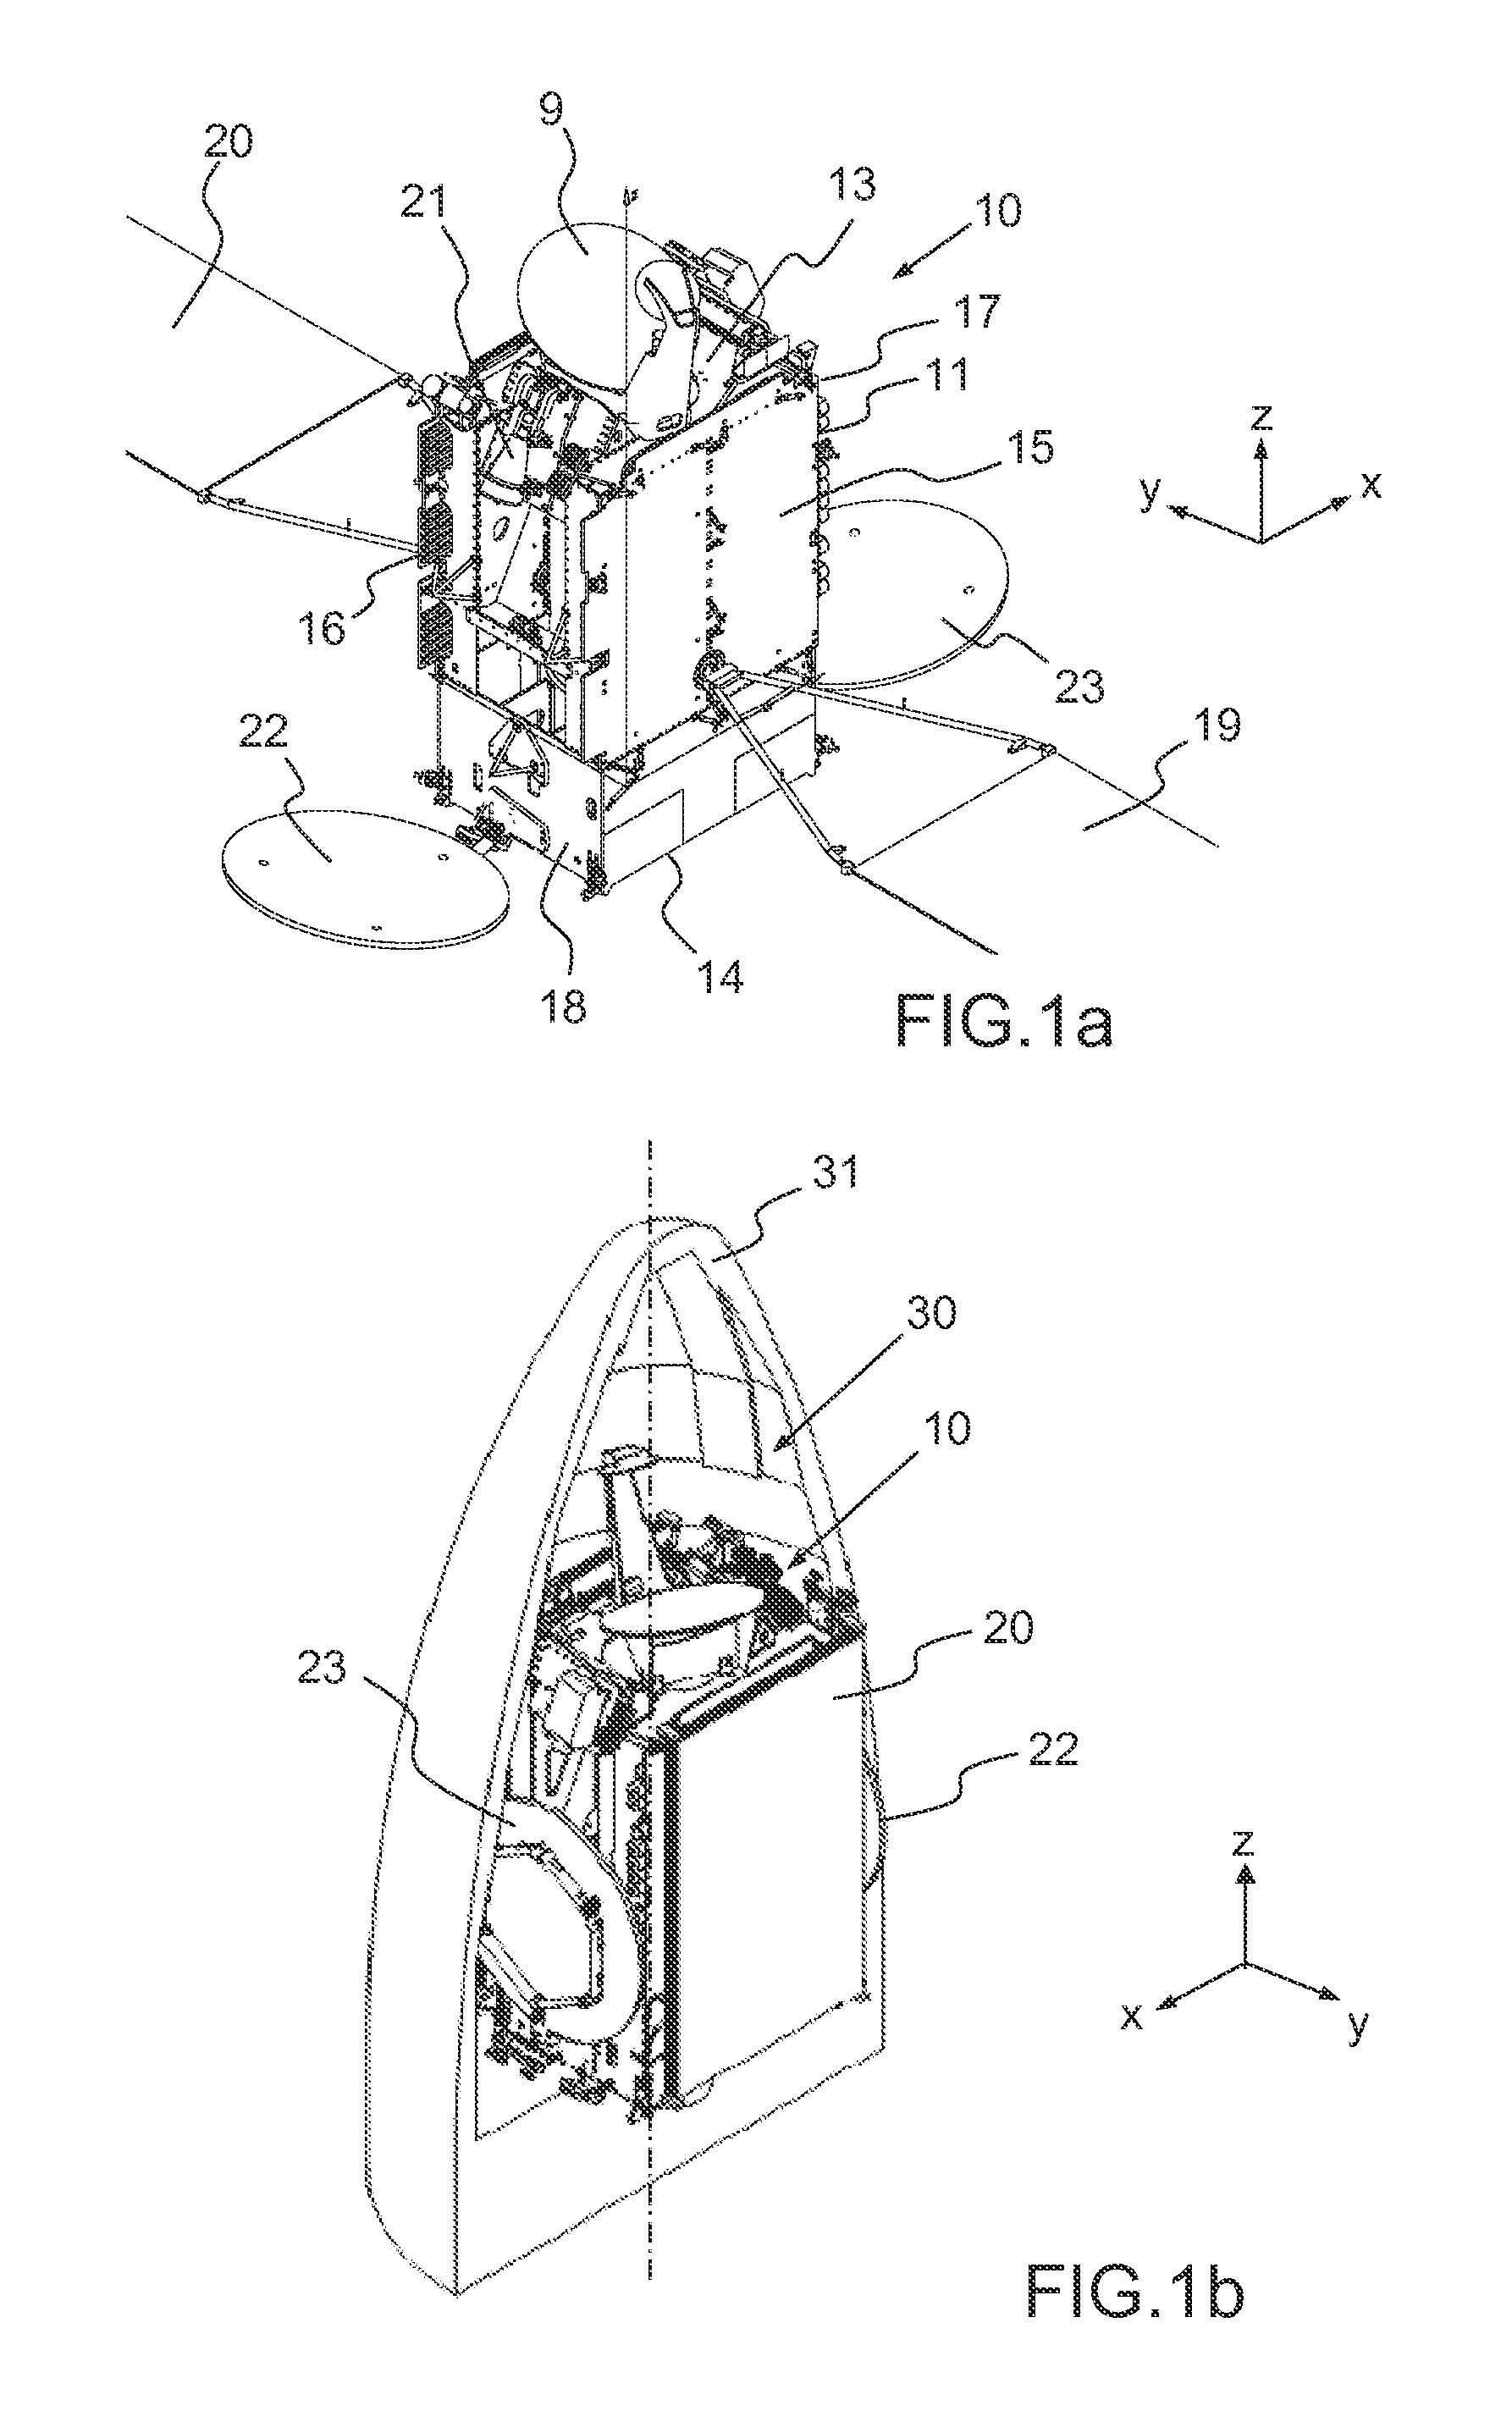 Satellite with deployable payload modules